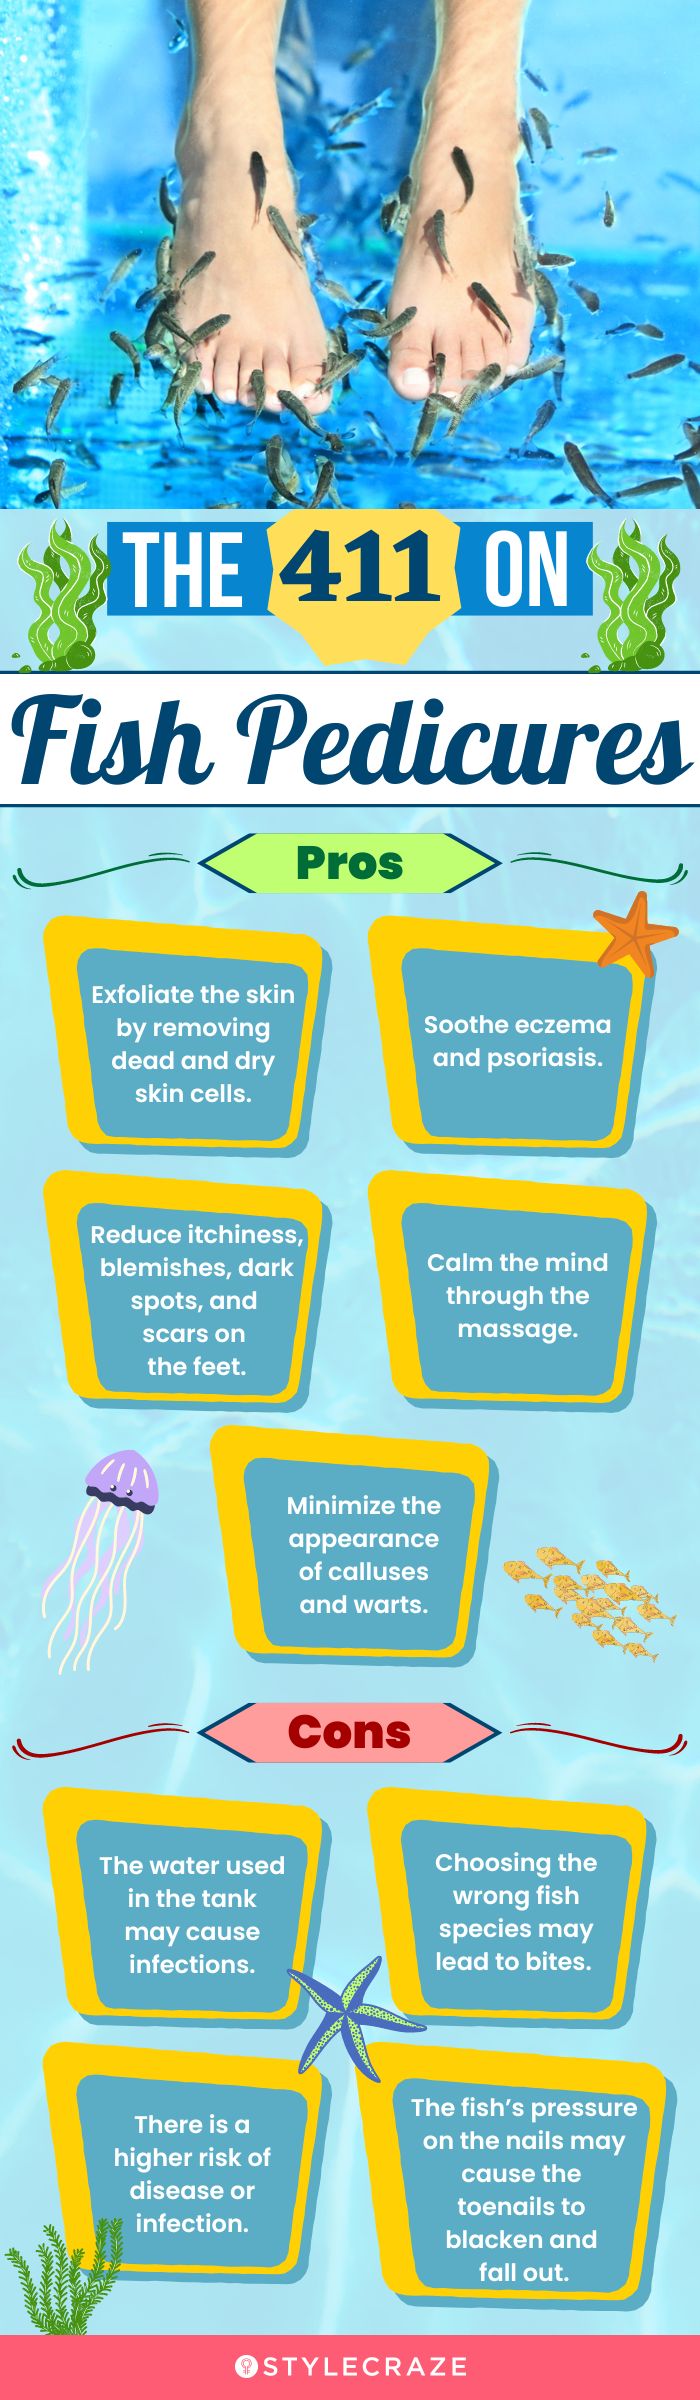 the 411 on fish pedicures (infographic)